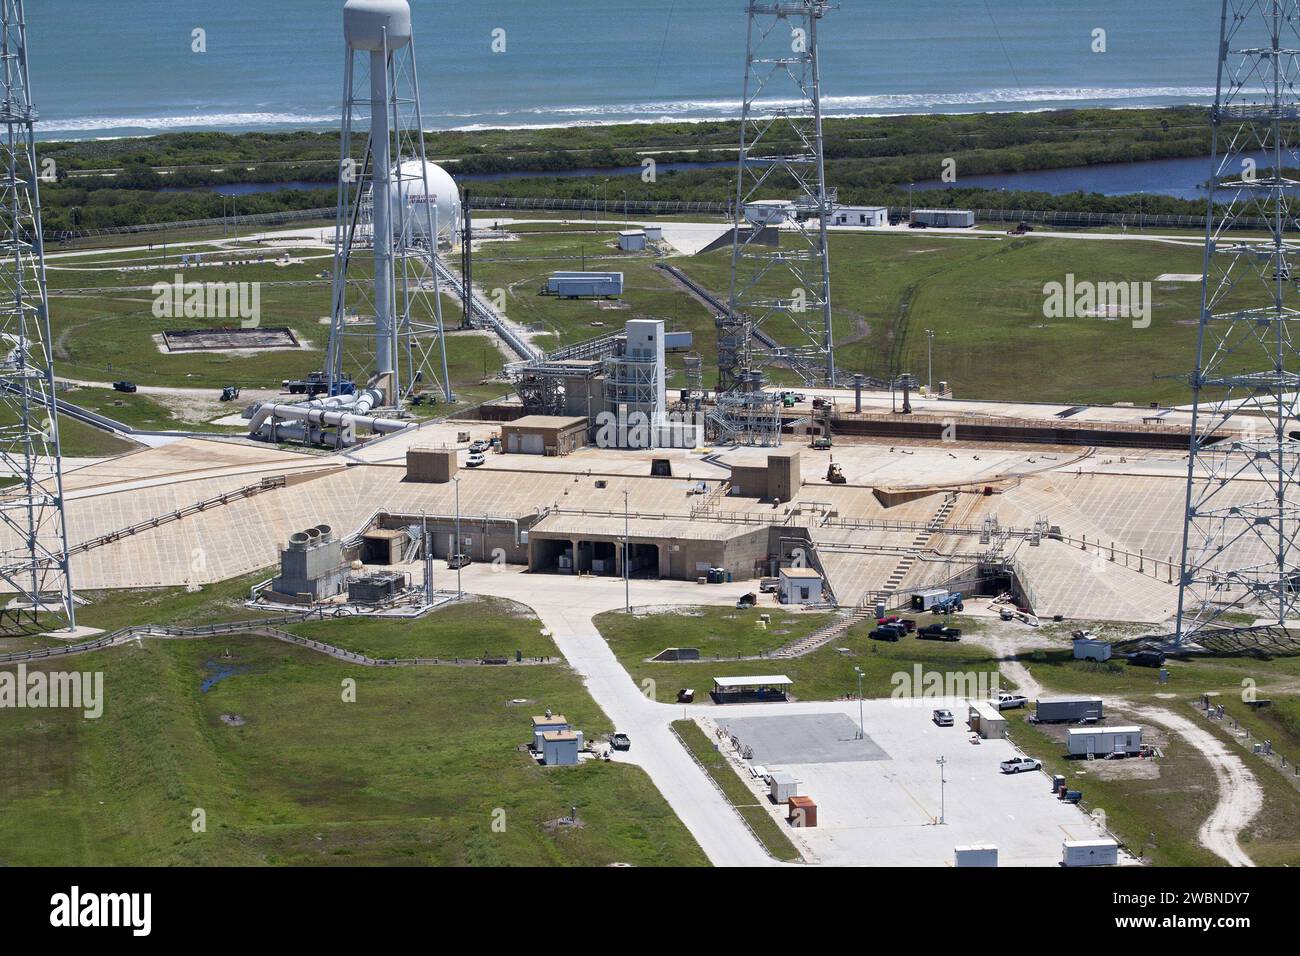 CAPE CANAVERAL, Fla. – An aerial view shows construction progress at Launch Pad 39B at NASA’s Kennedy Space Center in Florida. A new elevator has been constructed on the surface of the pad and the crawlerway leading up to the surface is being repaired. Repairs also are being made to the crawler track panels and catacomb roof below on either side of the flame trench. Also in view are the water tower and the three tall lightning towers that surround the pad. Upgrades are underway at Pad B and other facilities in the Launch Complex 39 area. The Ground Systems Development and Operations, or GSDO, Stock Photo